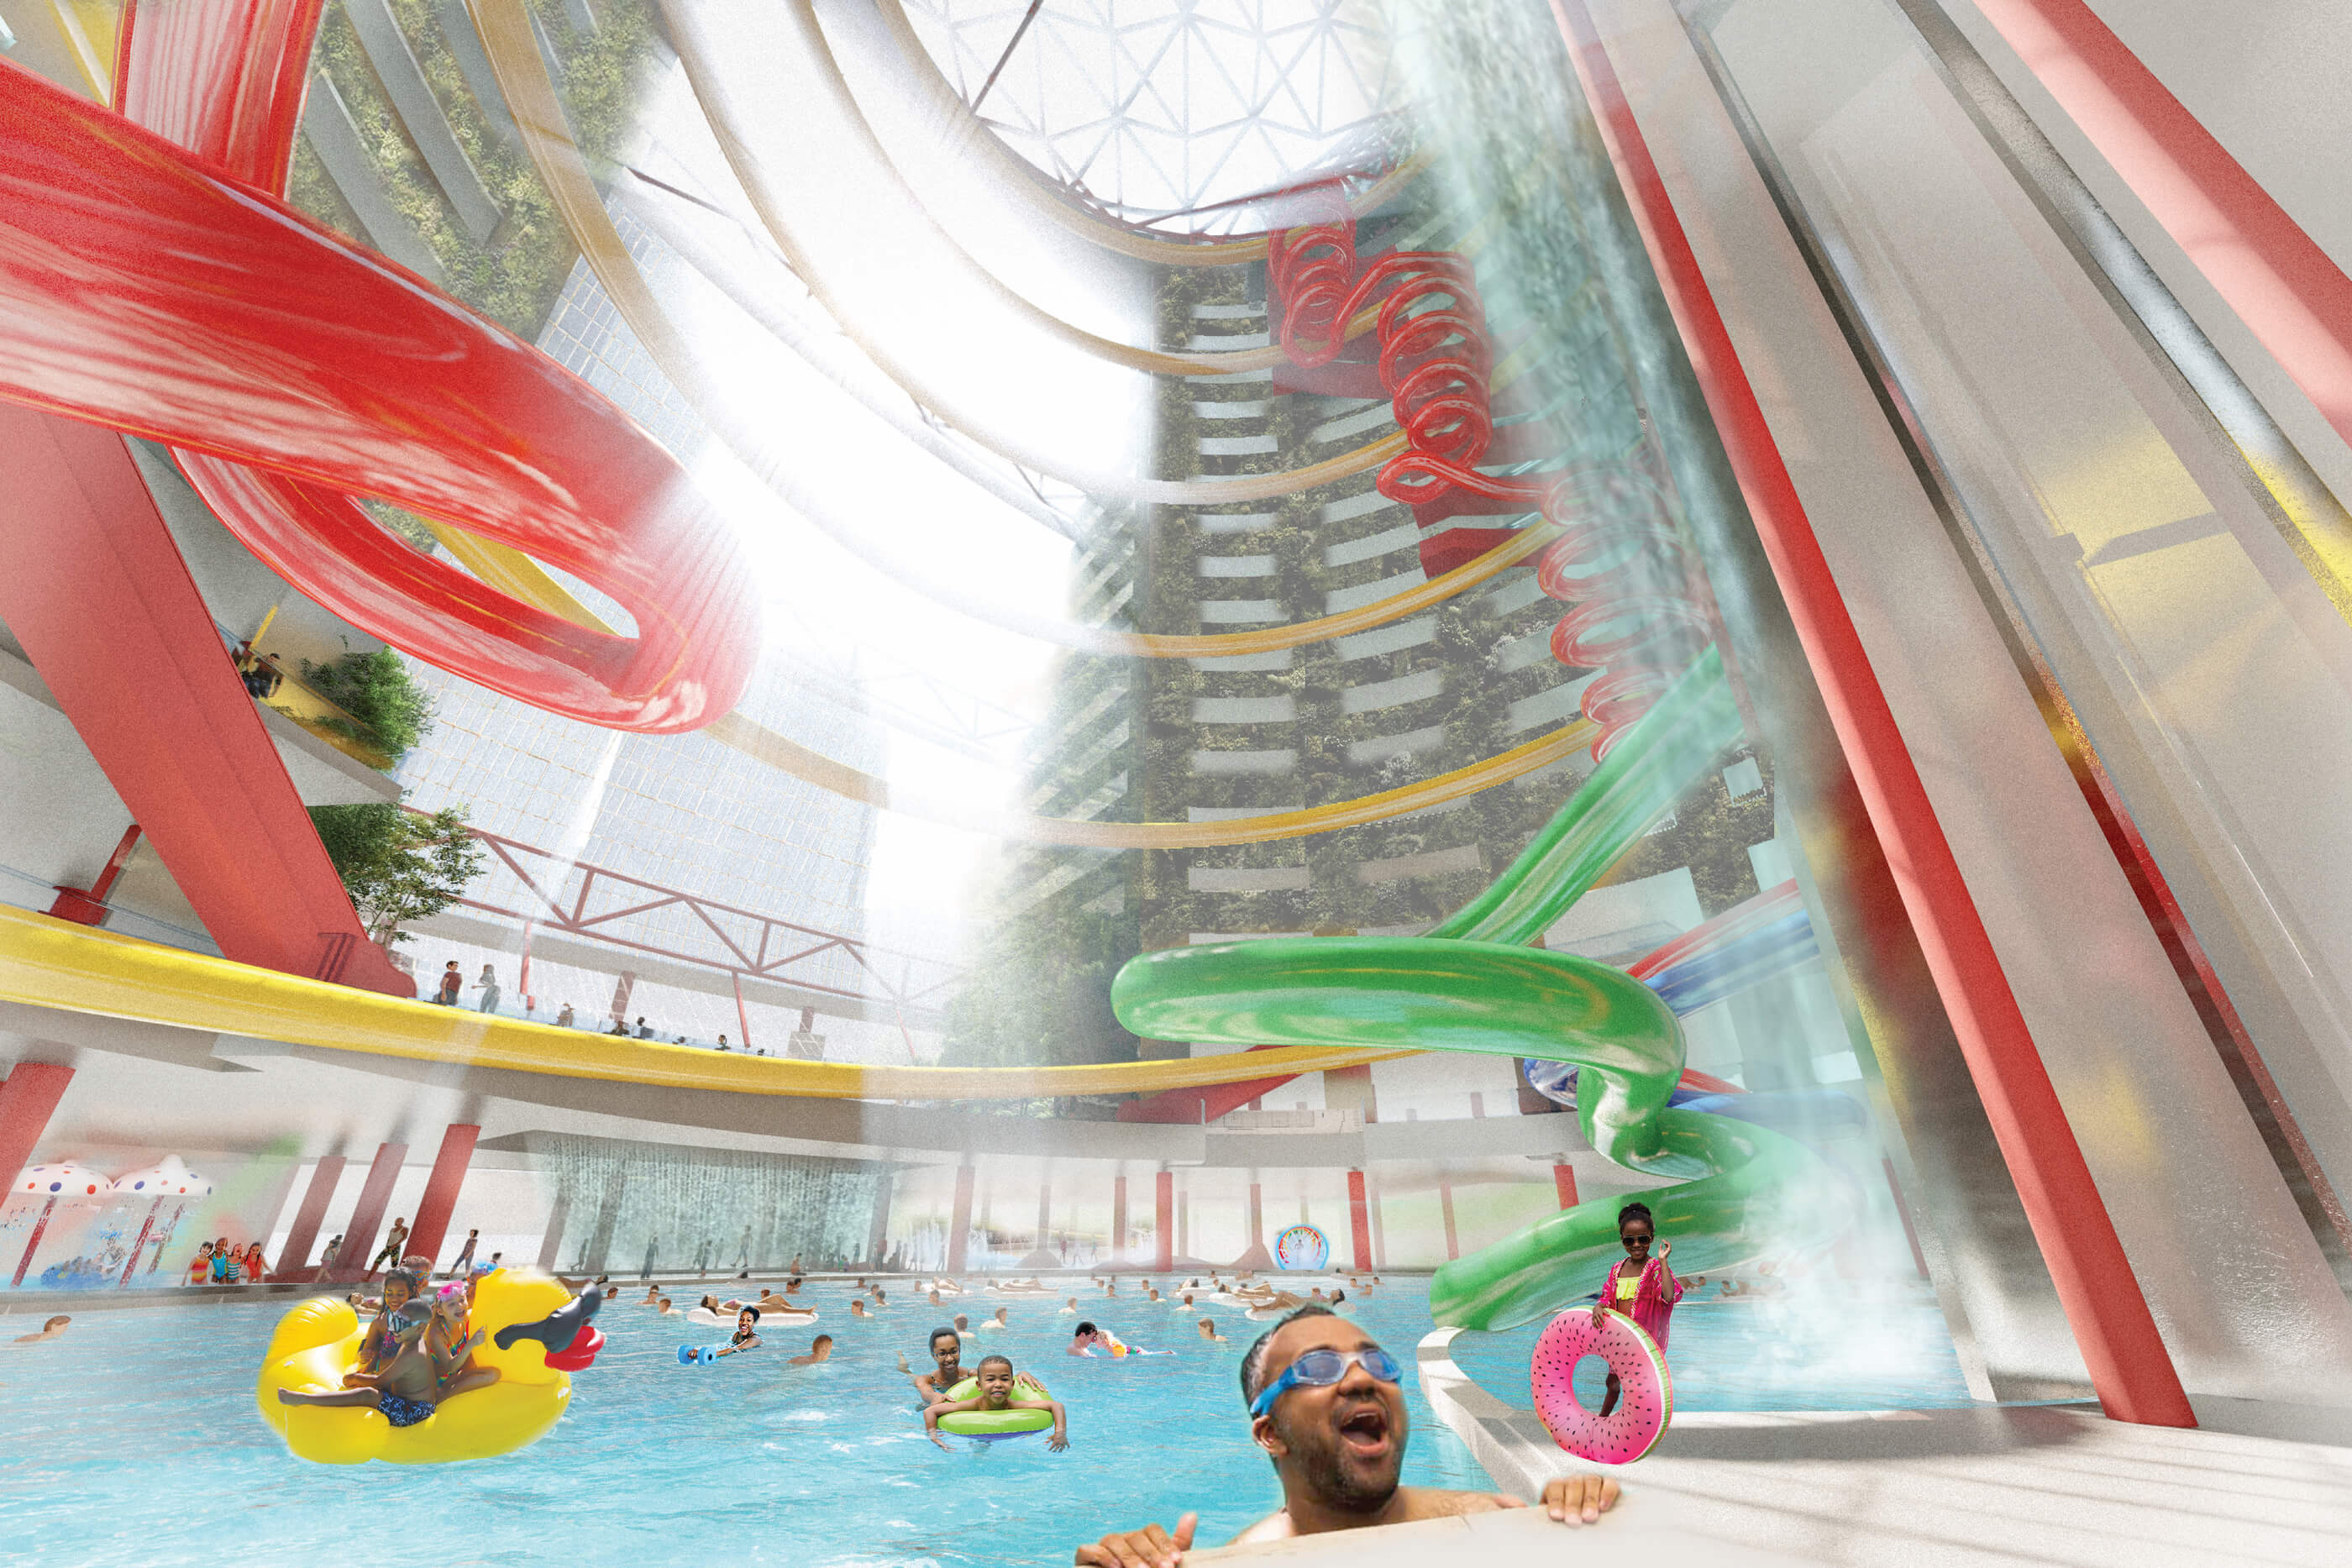 an indoor waterpark with slides in a massive atrium